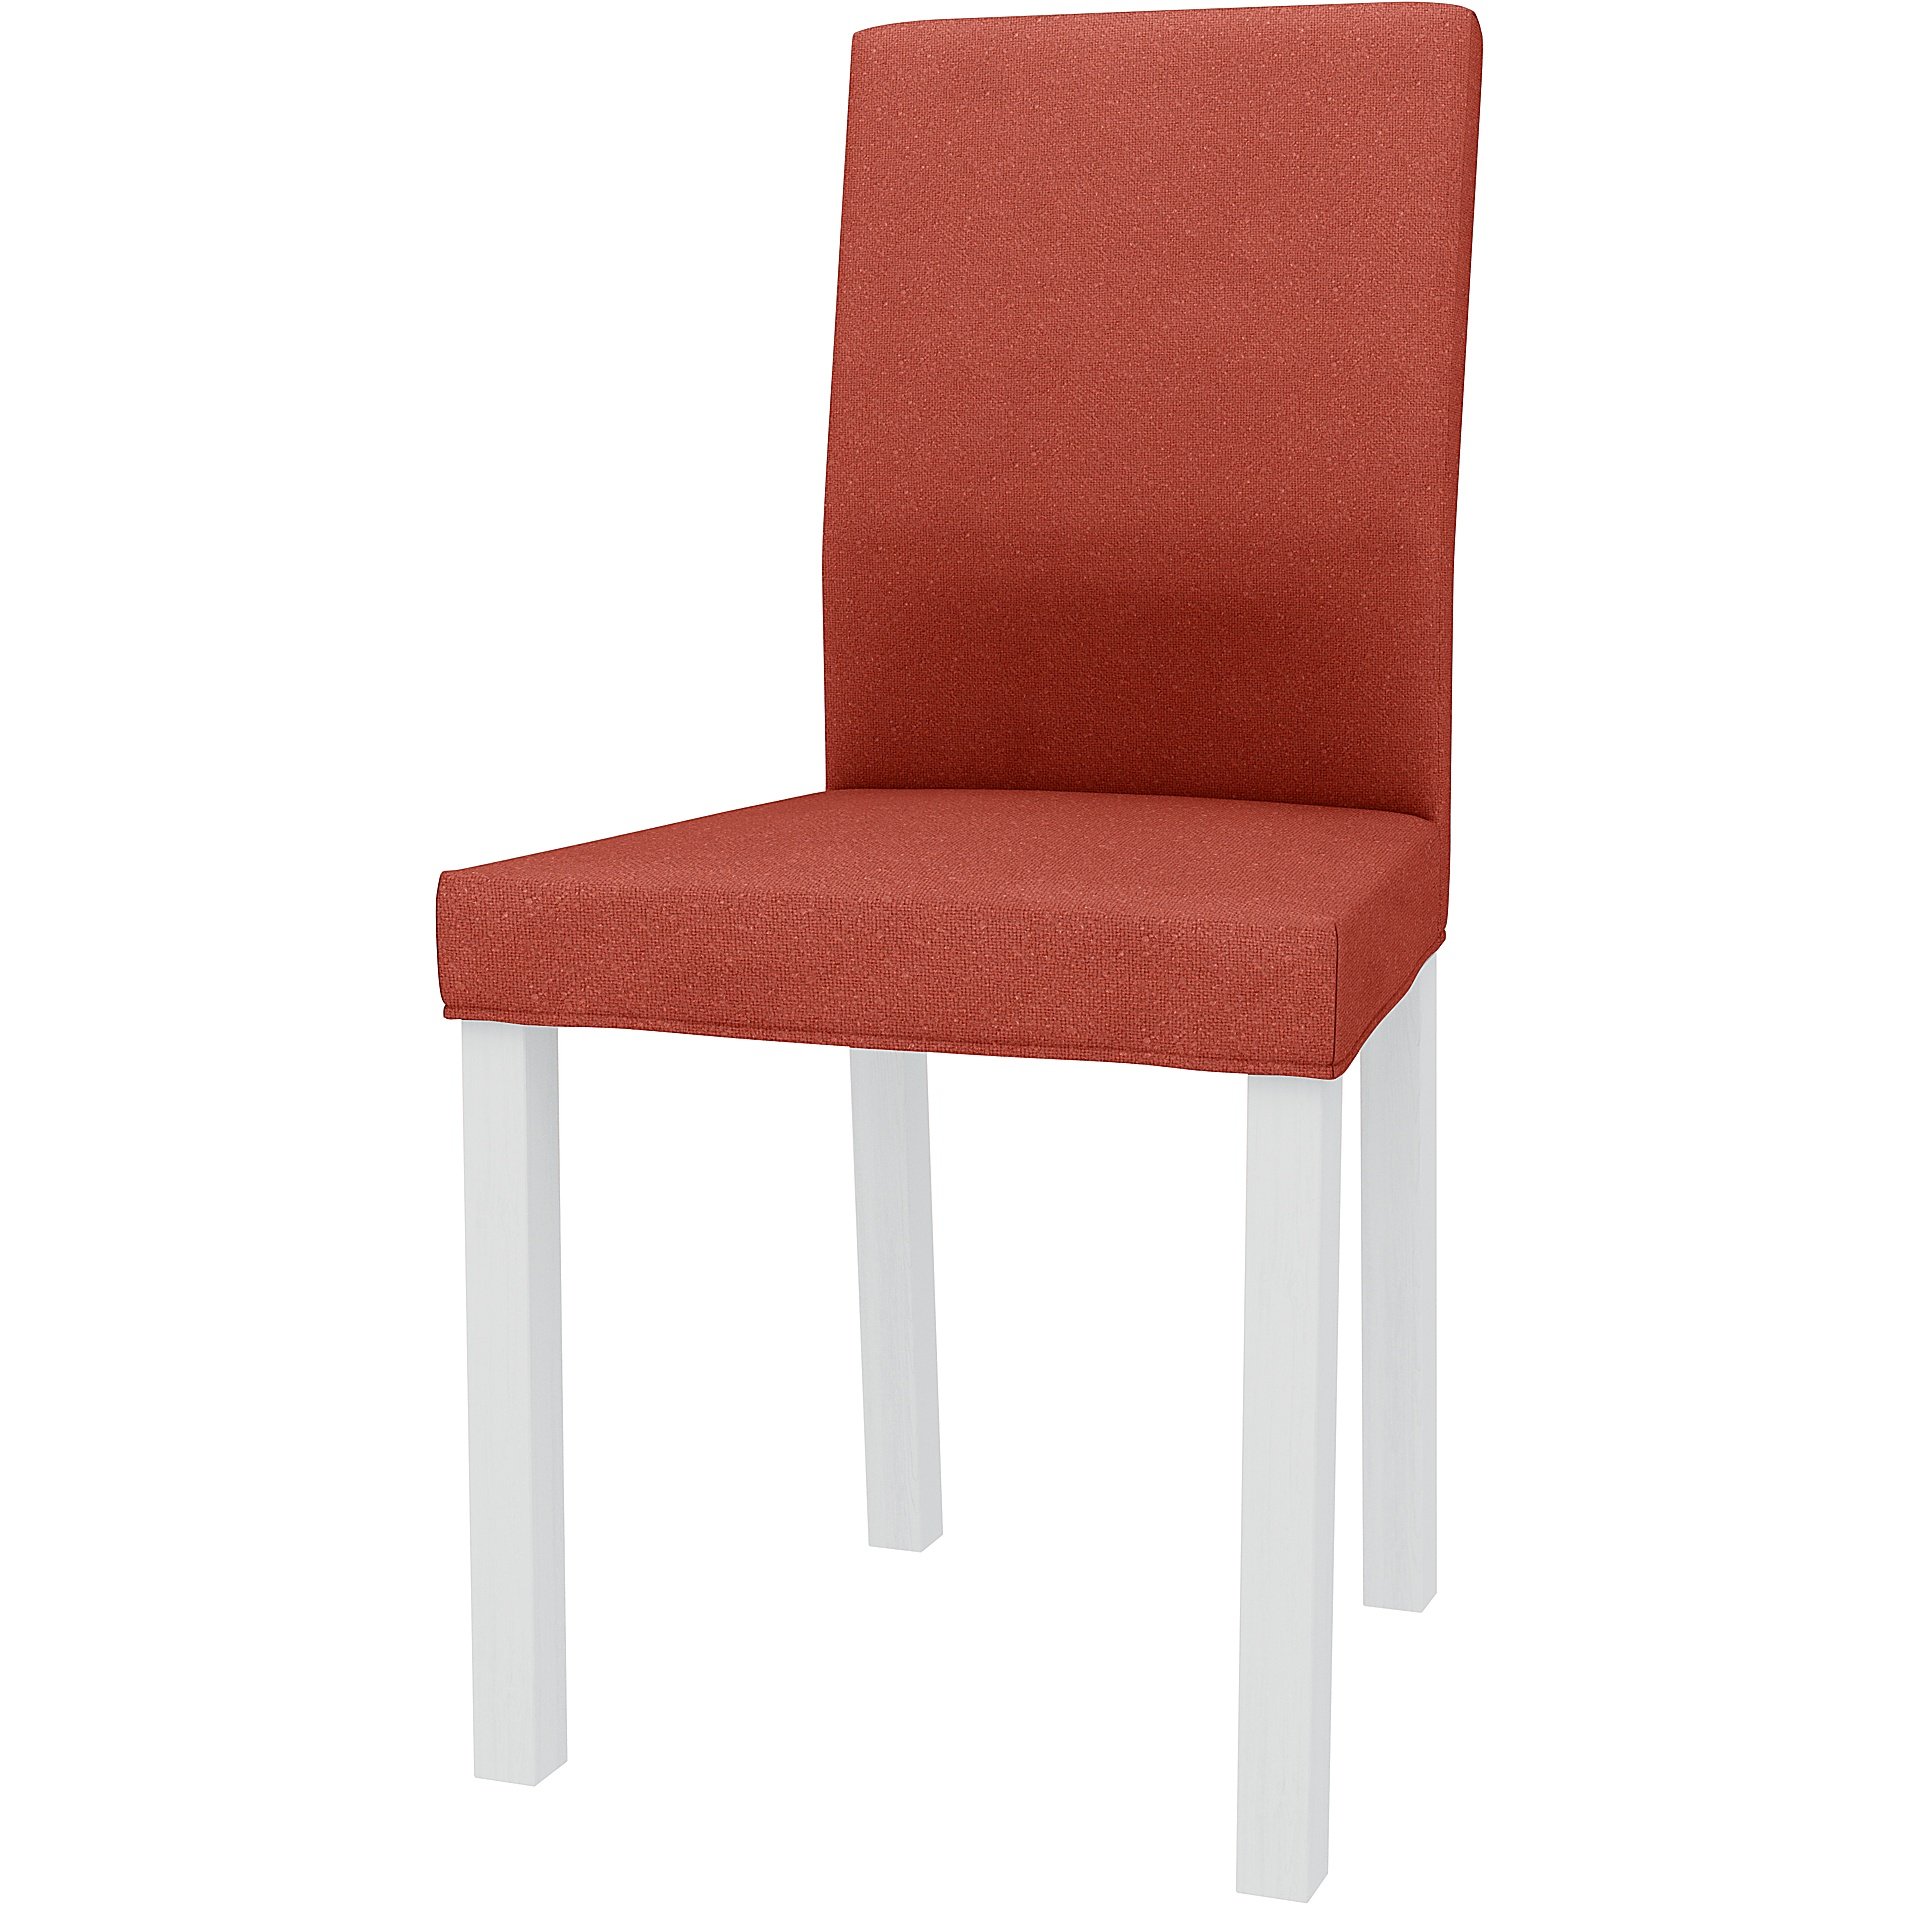 IKEA - KATTIL DINING CHAIR COVER, Coral Red, Outdoor - Bemz